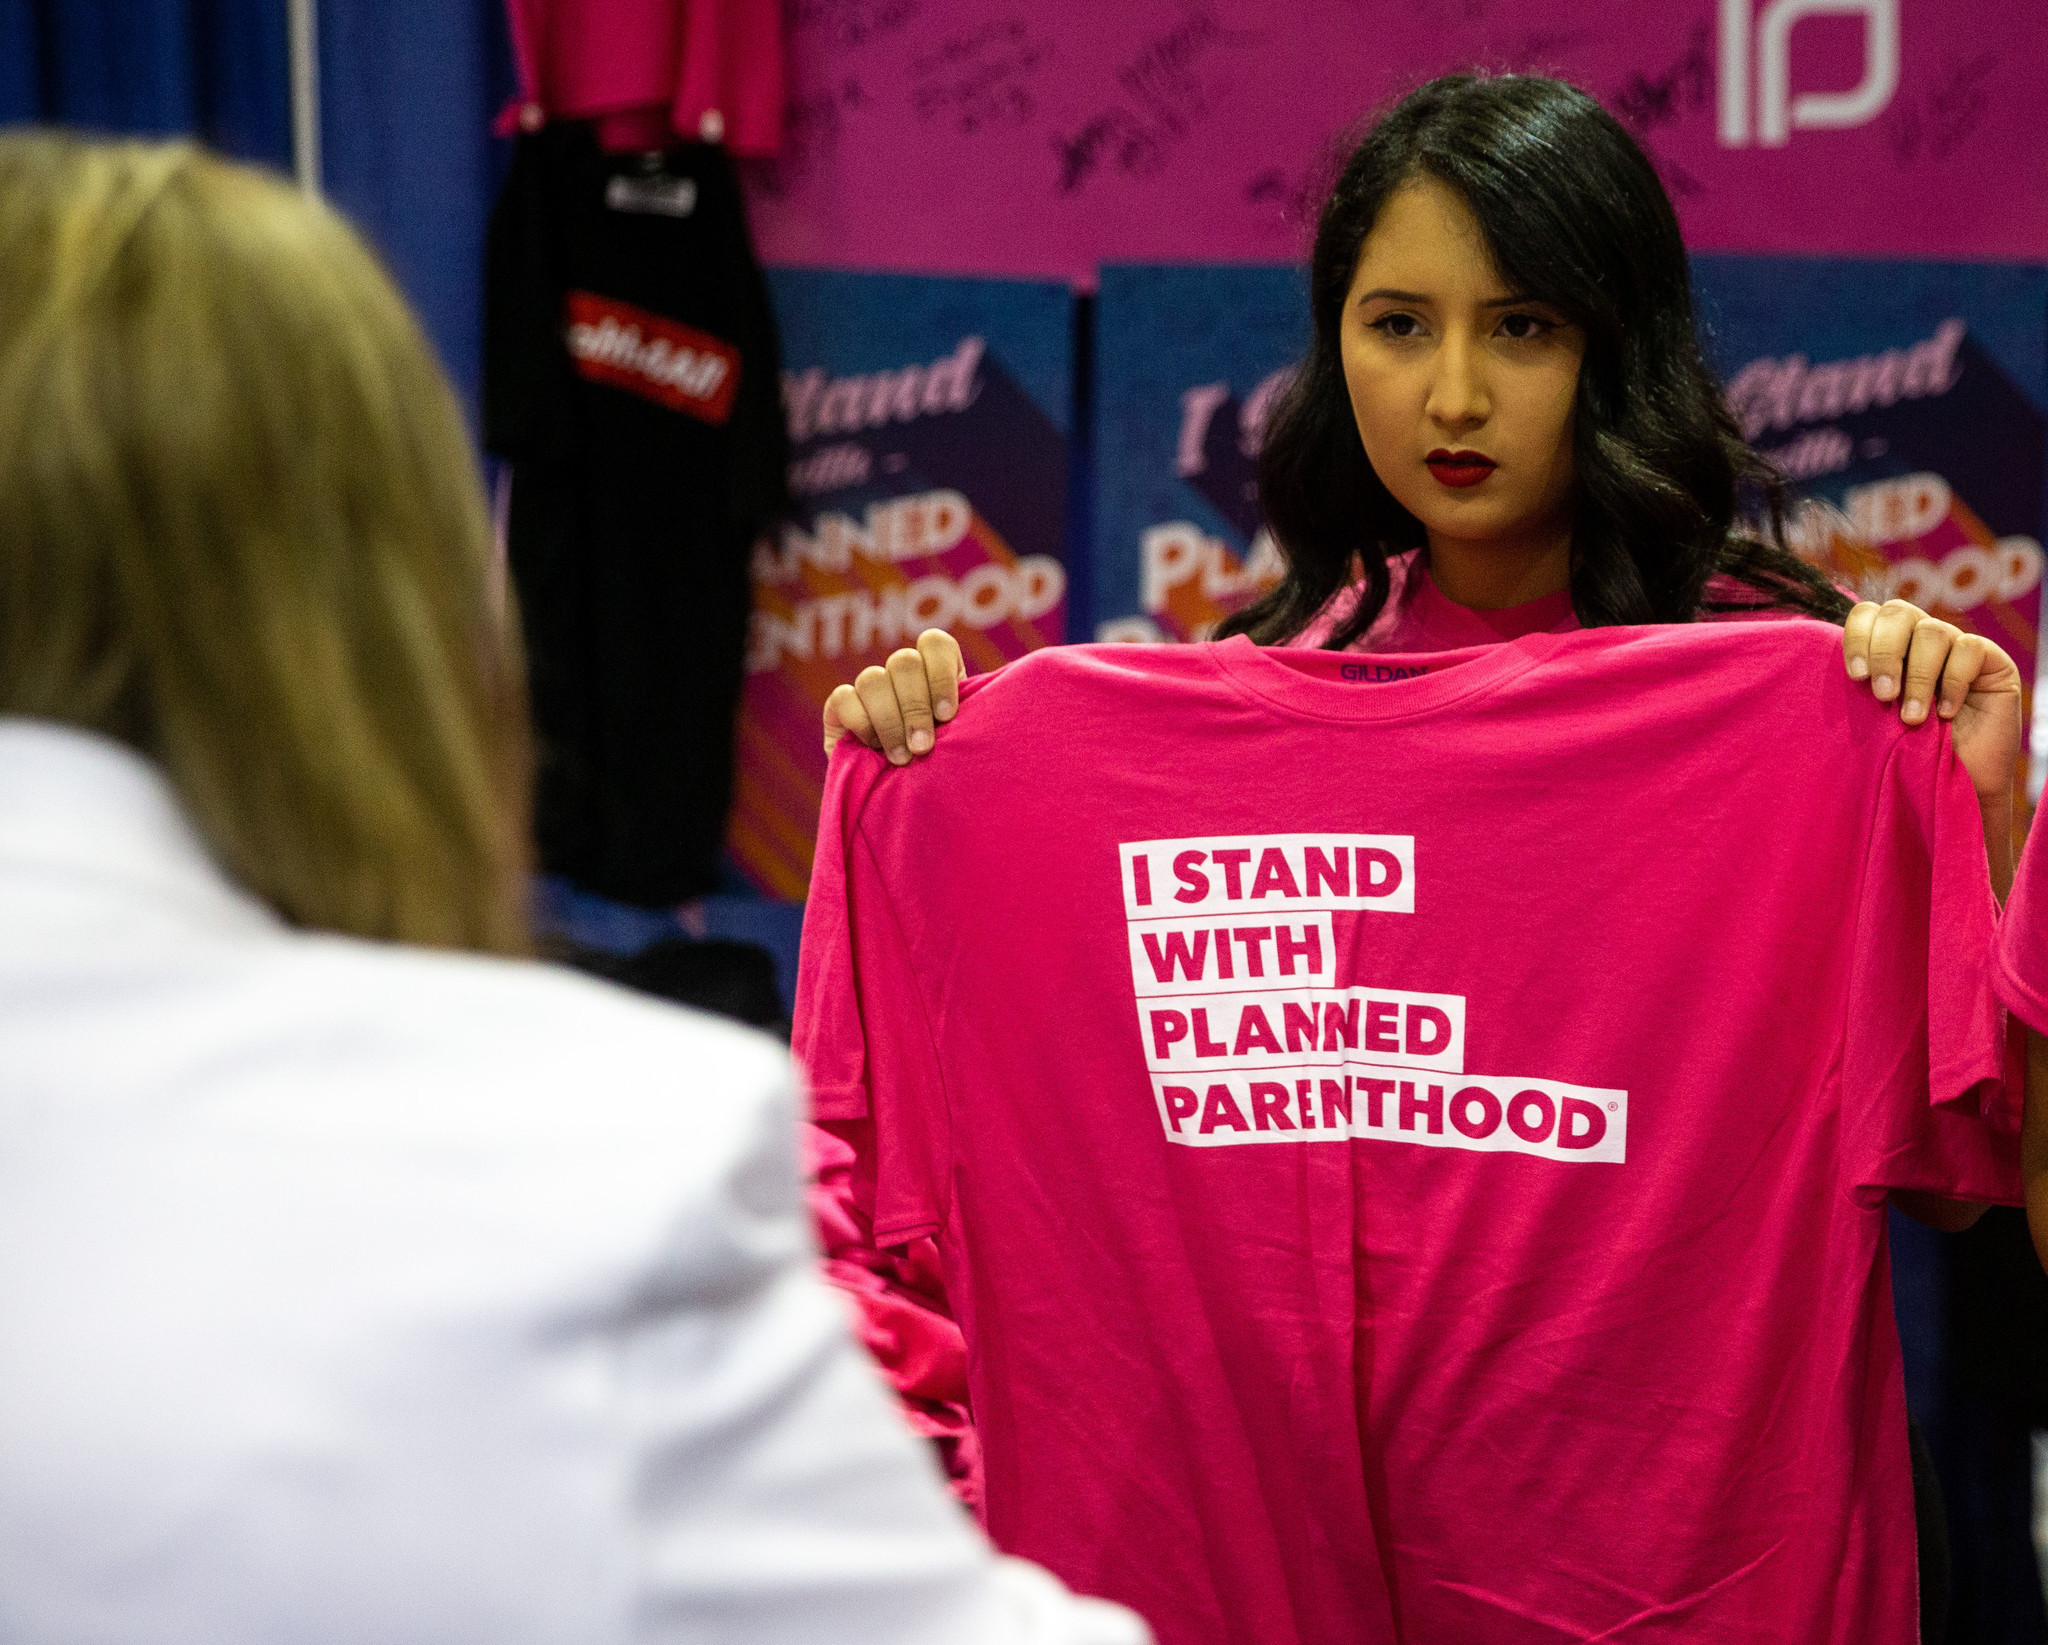 T-shirt at Planned Parenthood party